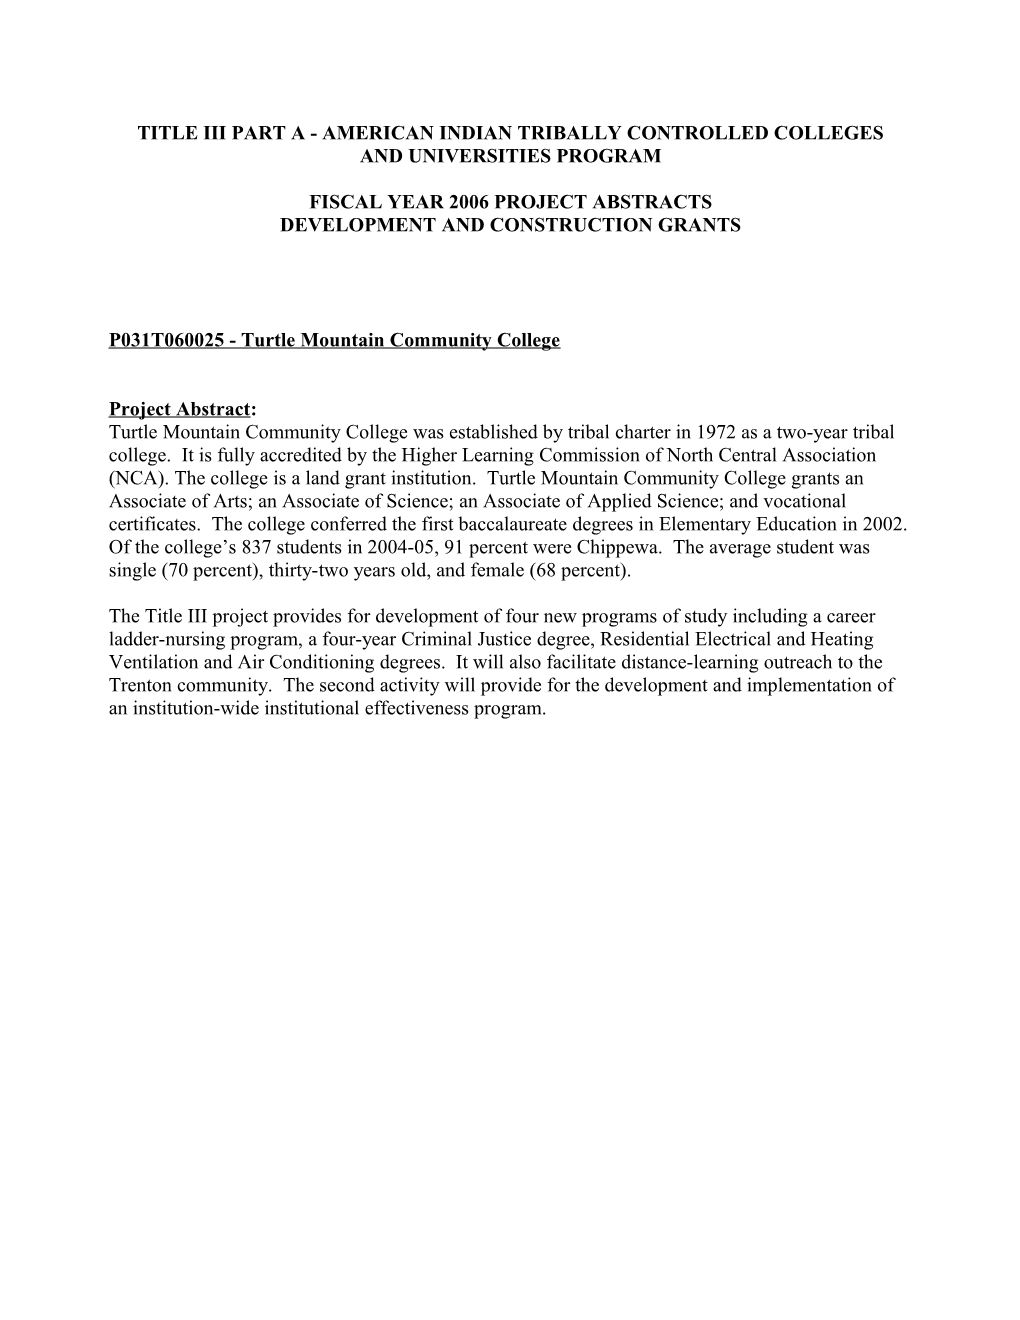 FY 2006 Project Abstracts for the Title III American Indian Tribally Controlled Colleges